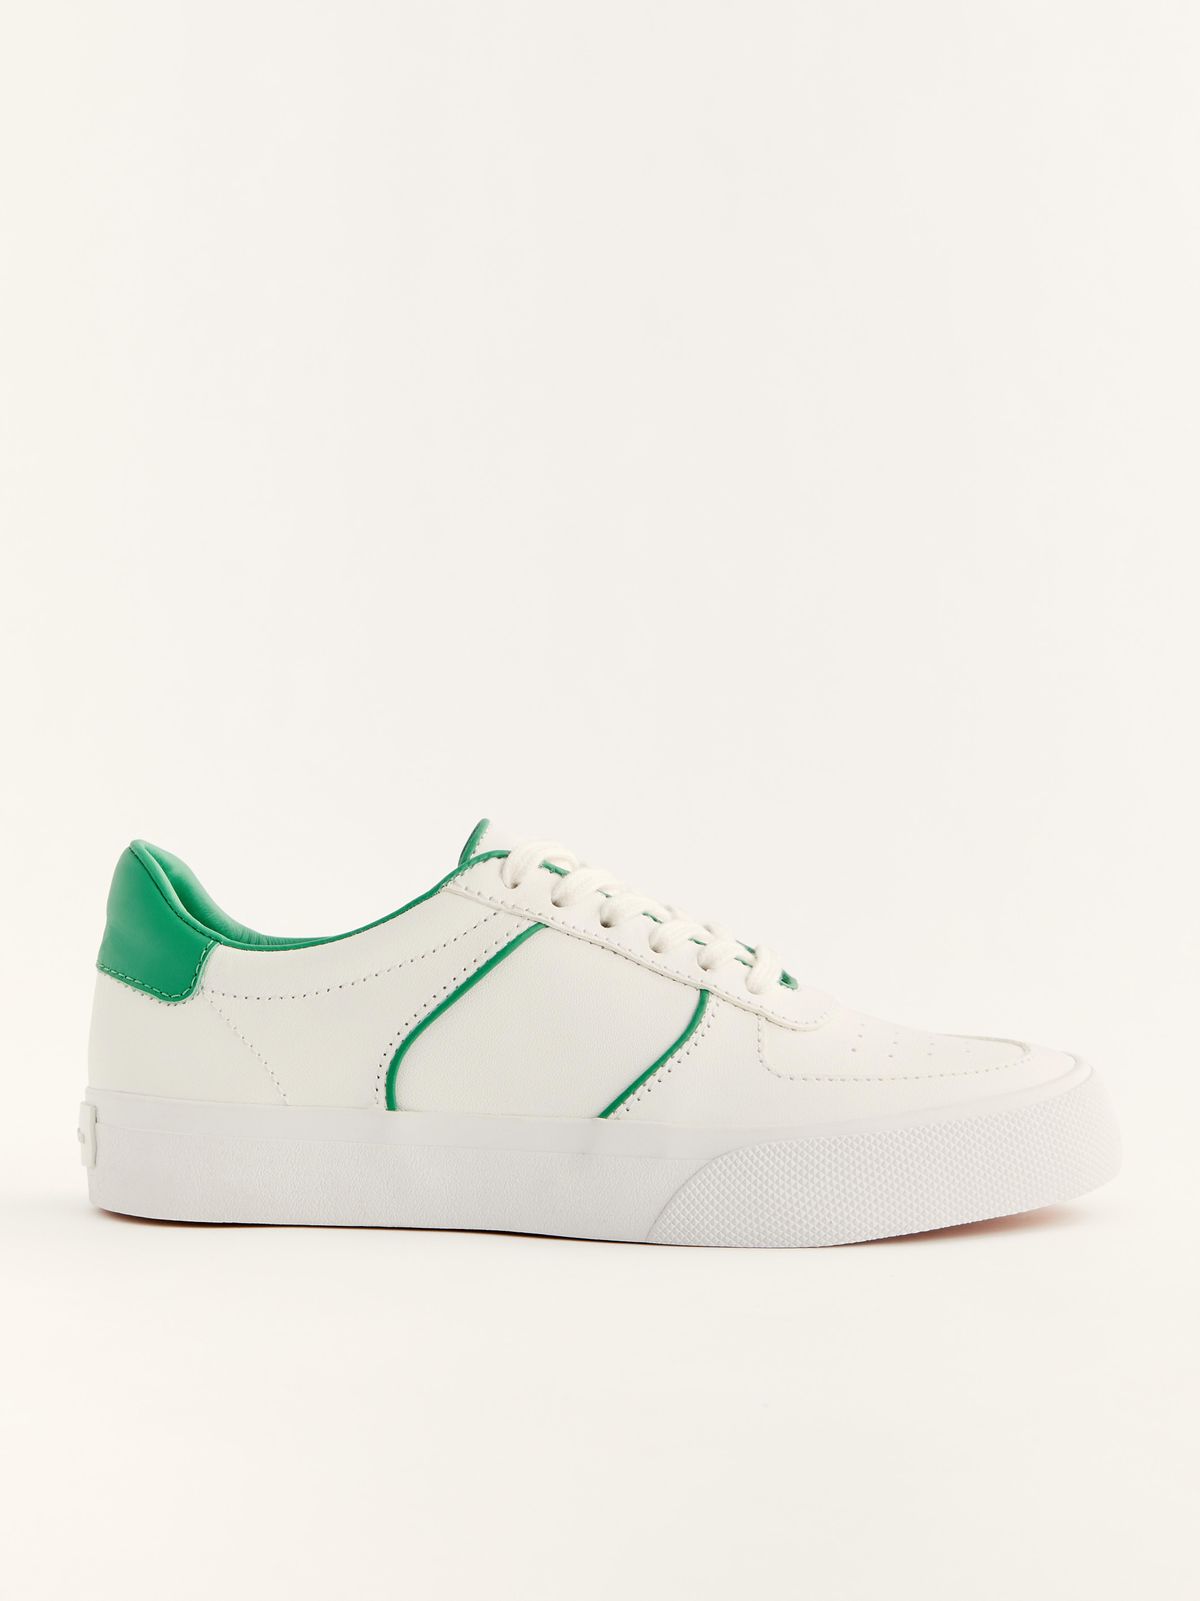 Harlow Leather Sneaker in White / Lawn